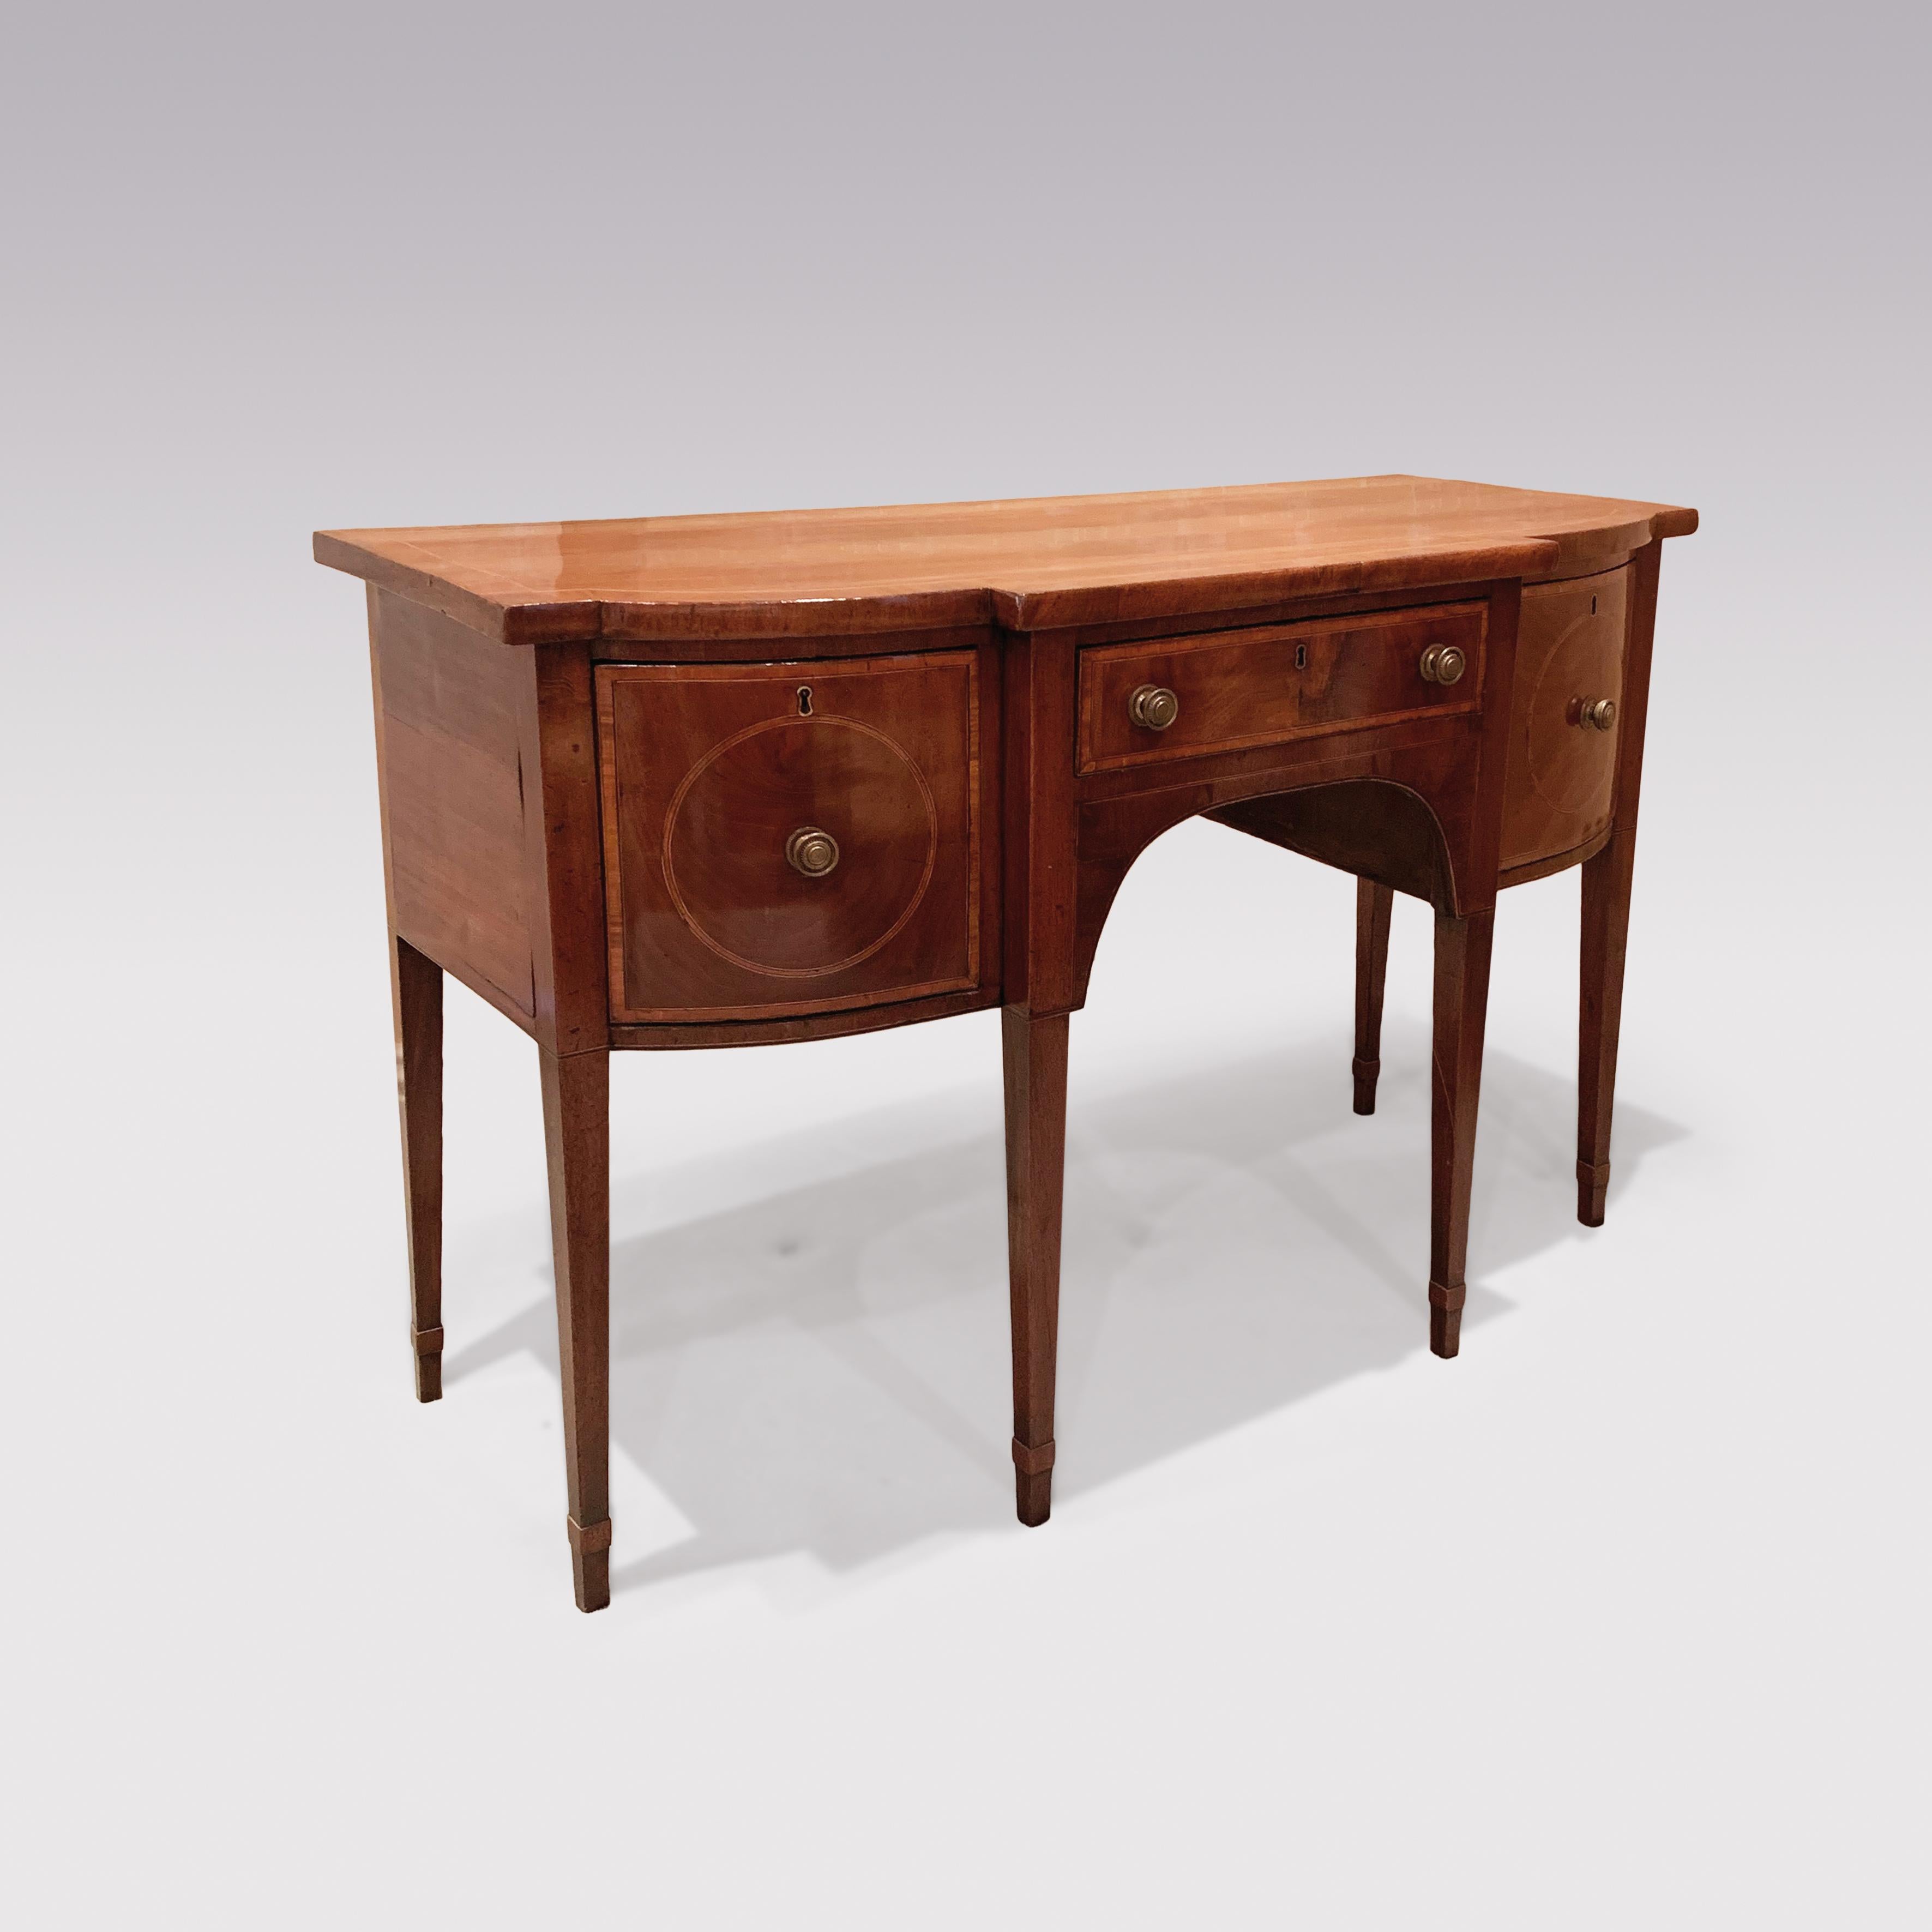 A late 18th century Sheraton period mahogany breakfront bowfront sideboard of attractive small proportions, boxwood and ebony strung throughout, having mahogany crossbanded top above satinwood crossbanded drawers, supported on square tapering legs